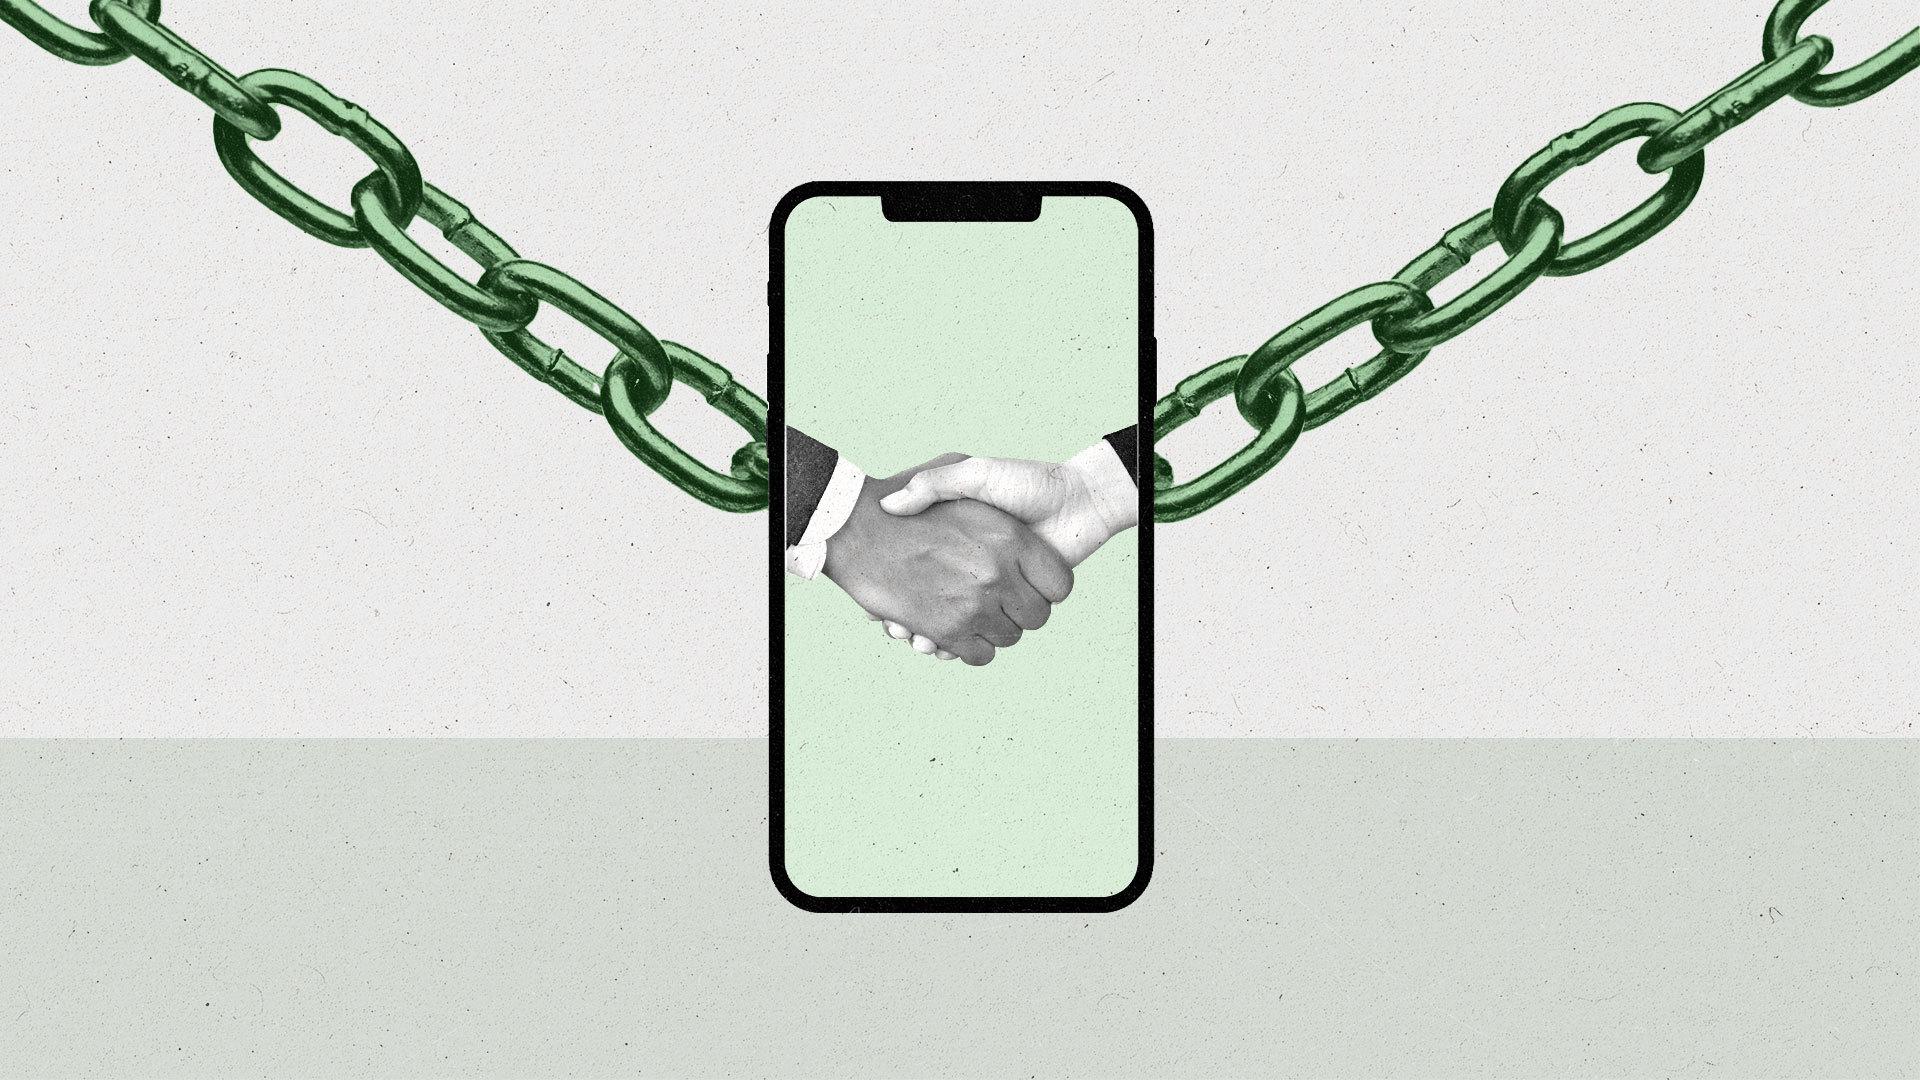 Two chains from each side connected at the center with a phone displaying a handshake.